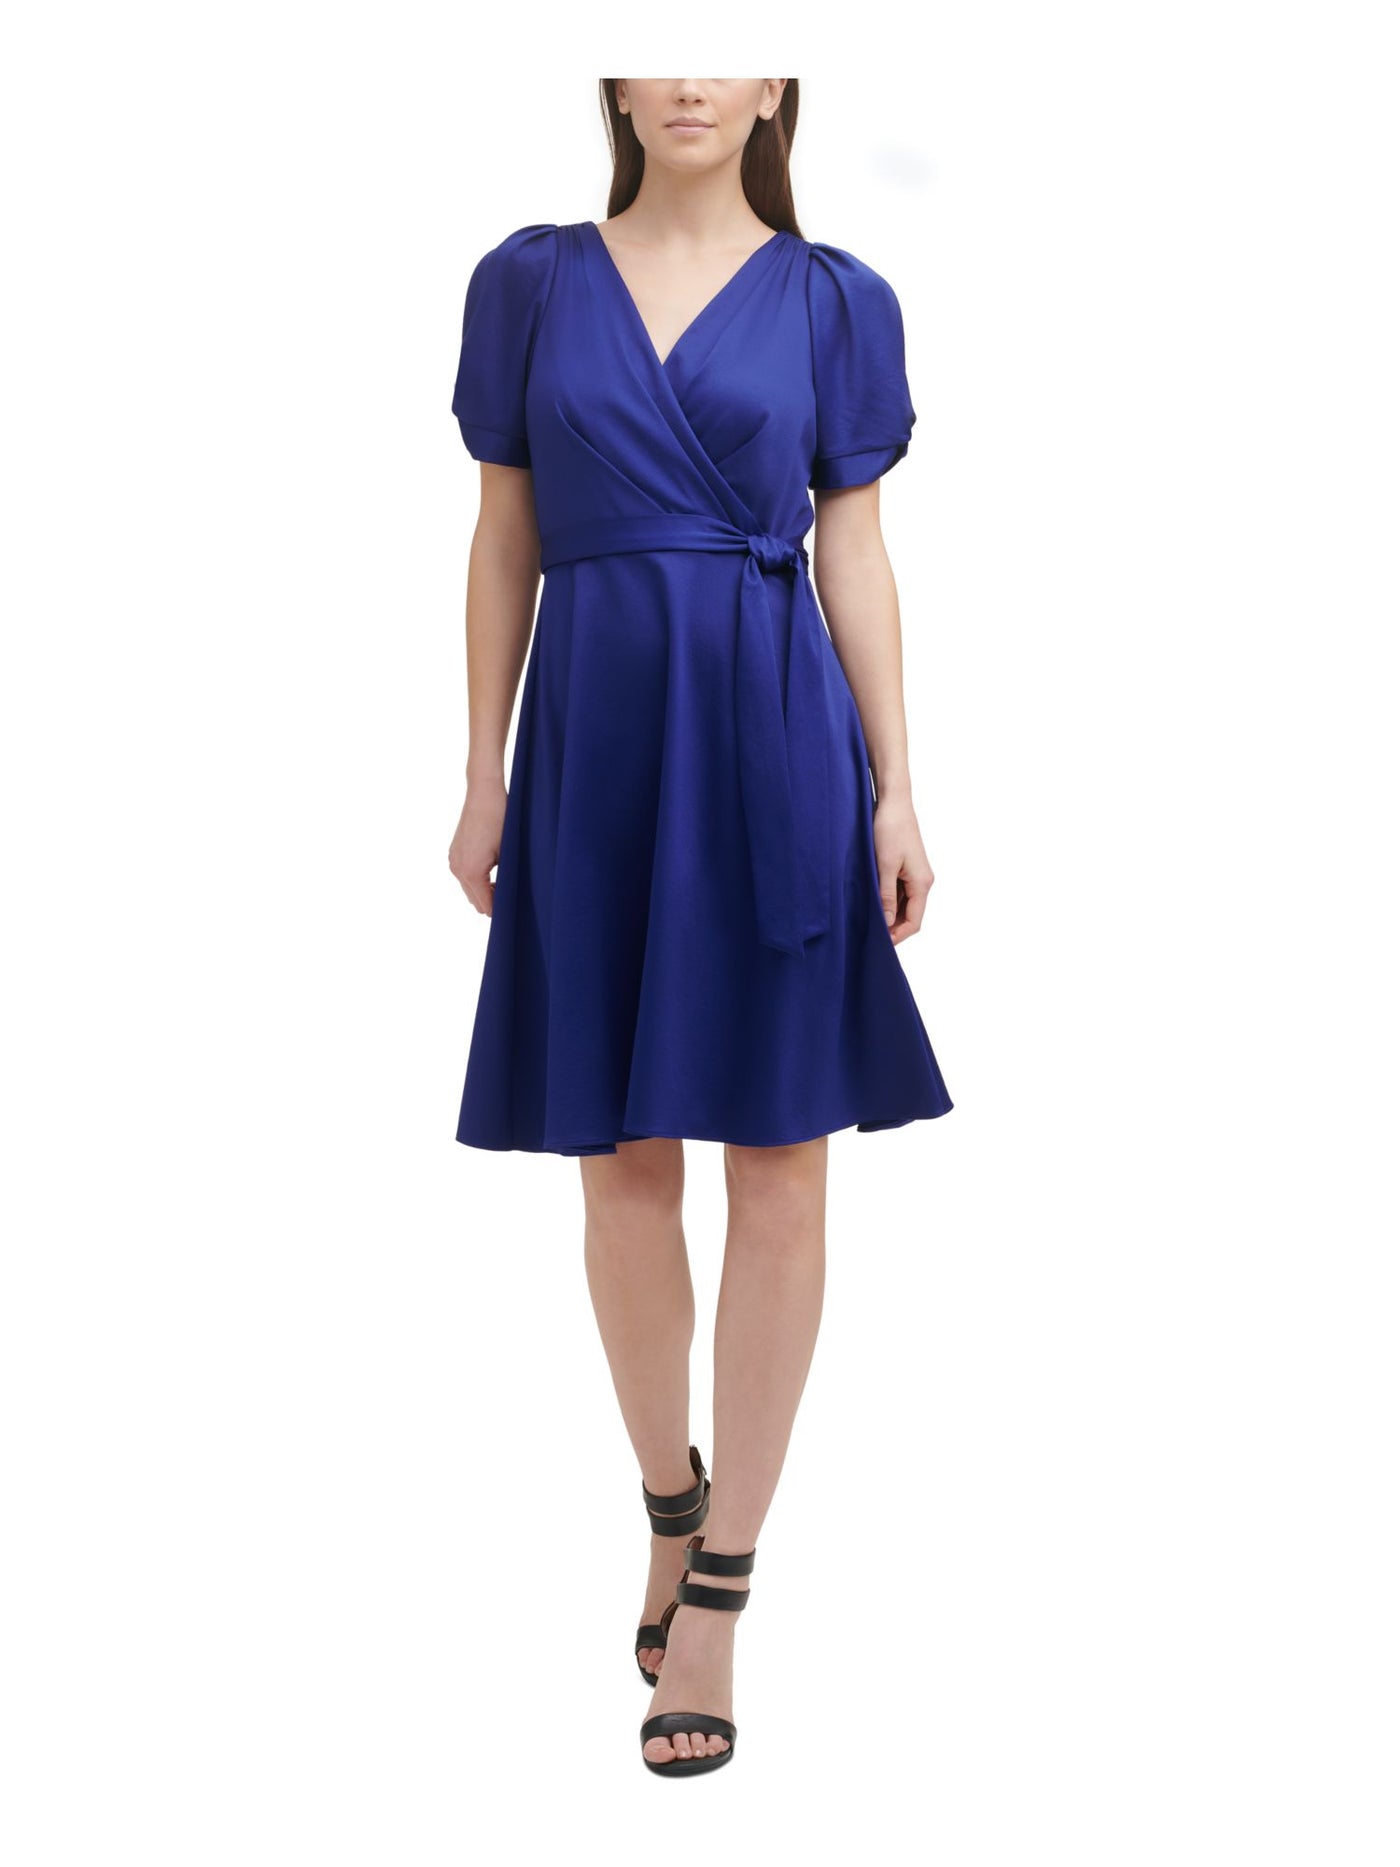 DKNY Womens Blue Pleated Zippered Belted Unlined Short Pouf Knot-s Surplice Neckline Above The Knee Evening Fit + Flare Dress 12